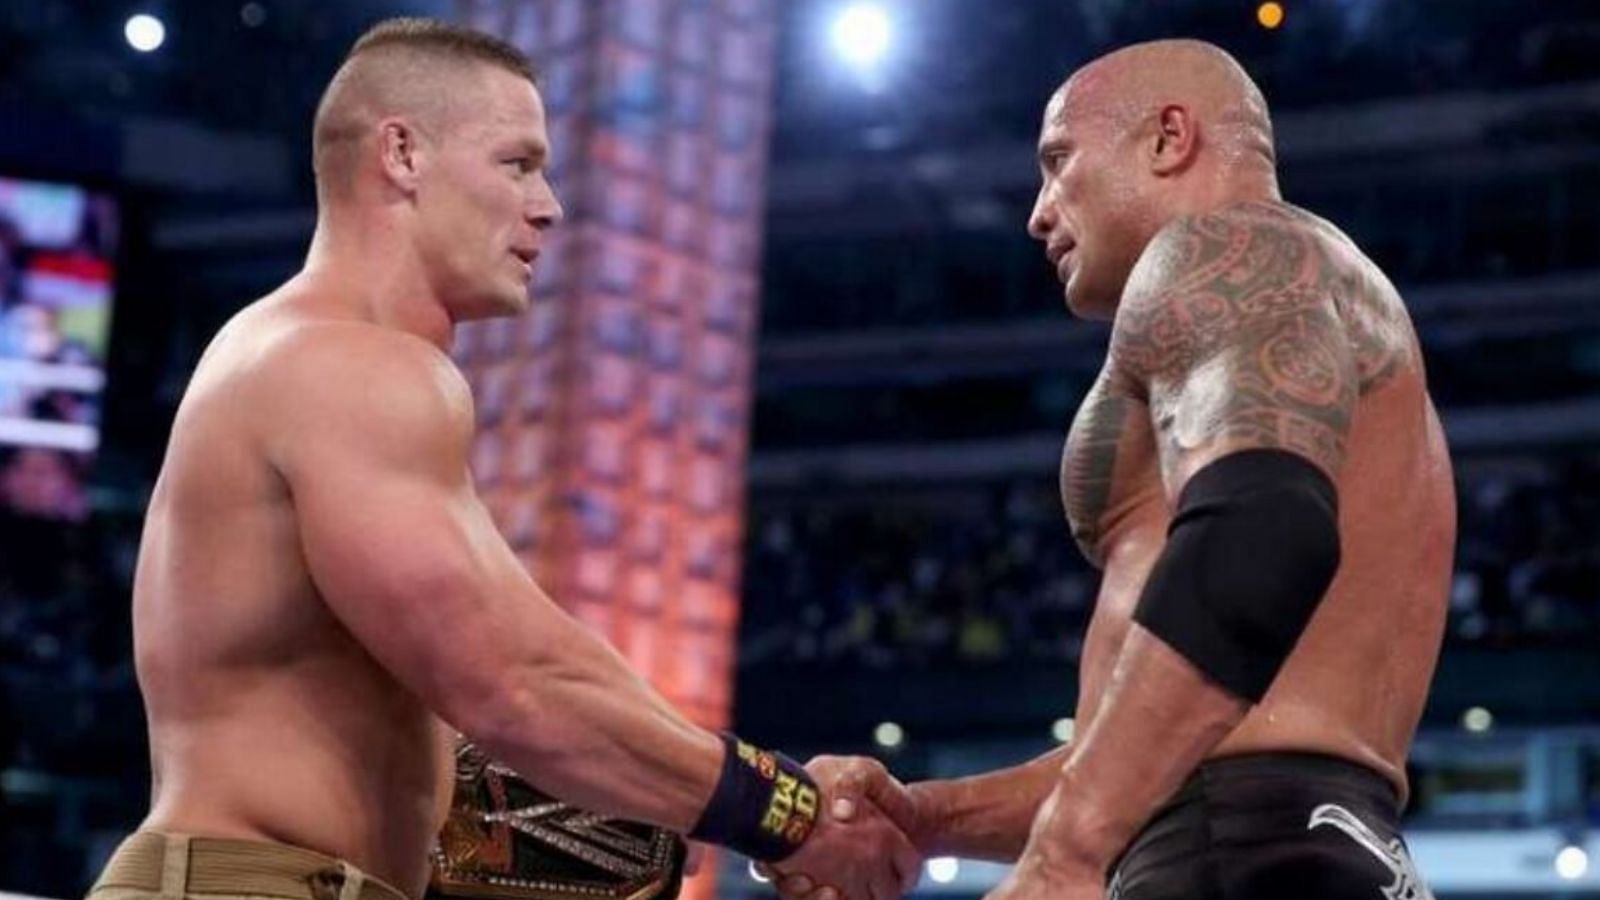 The two future WWE Hall of Famers during their WrestleMania match